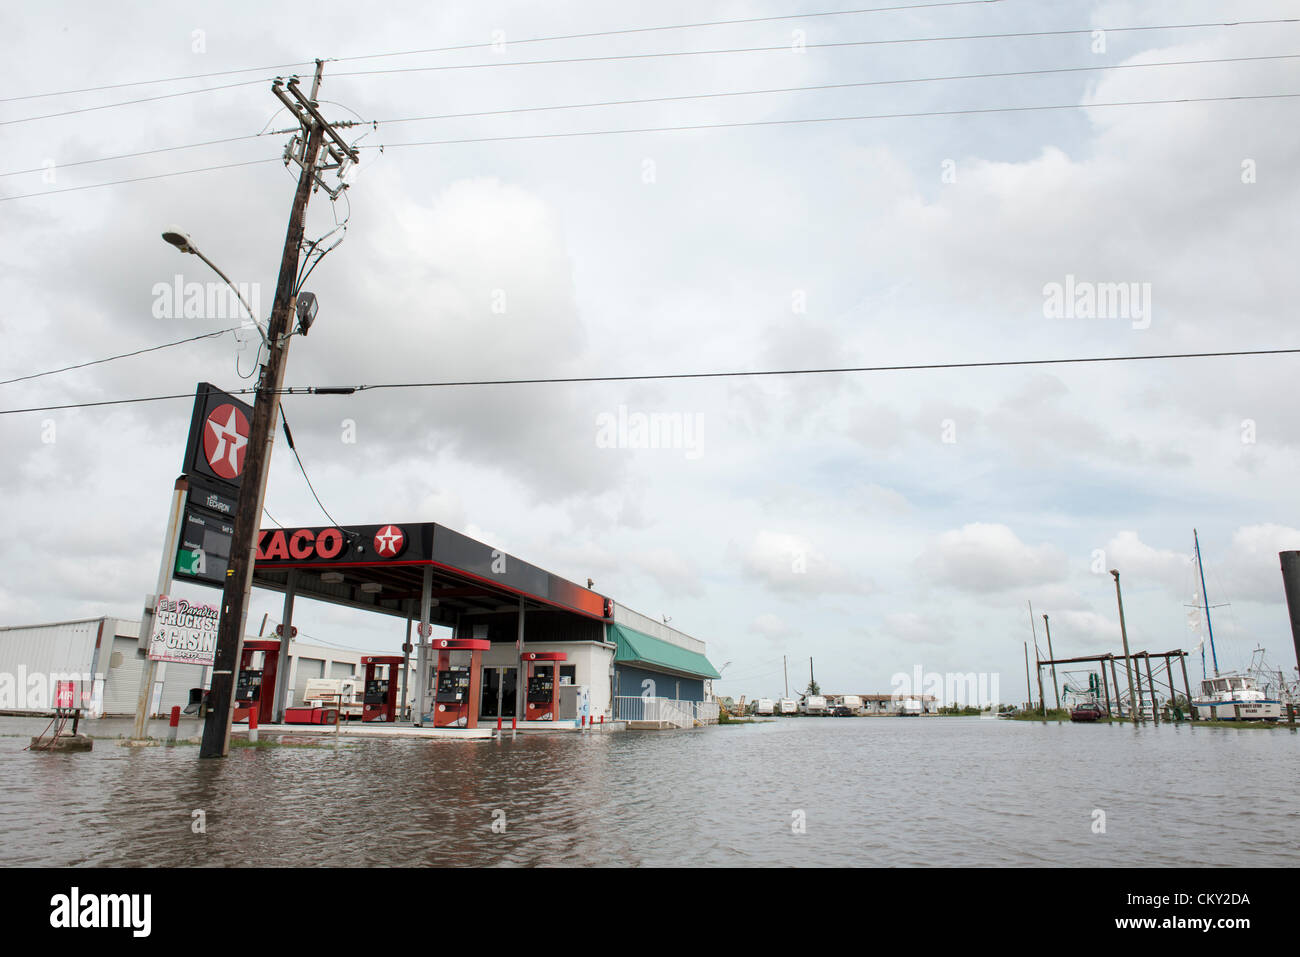 Floodwaters remain on Friday, August 31 2012 in New Orleans suburbs following Hurricane Isaac's hovering rainfall. Daily high tides have created a continuing surge of floodwaters into unexpected areas. Many blame the Corps of Engineers for diverting floodwater overflow into the suburbs during the restructuring of New Orleans flood control system following Hurricane Katrina. Stock Photo